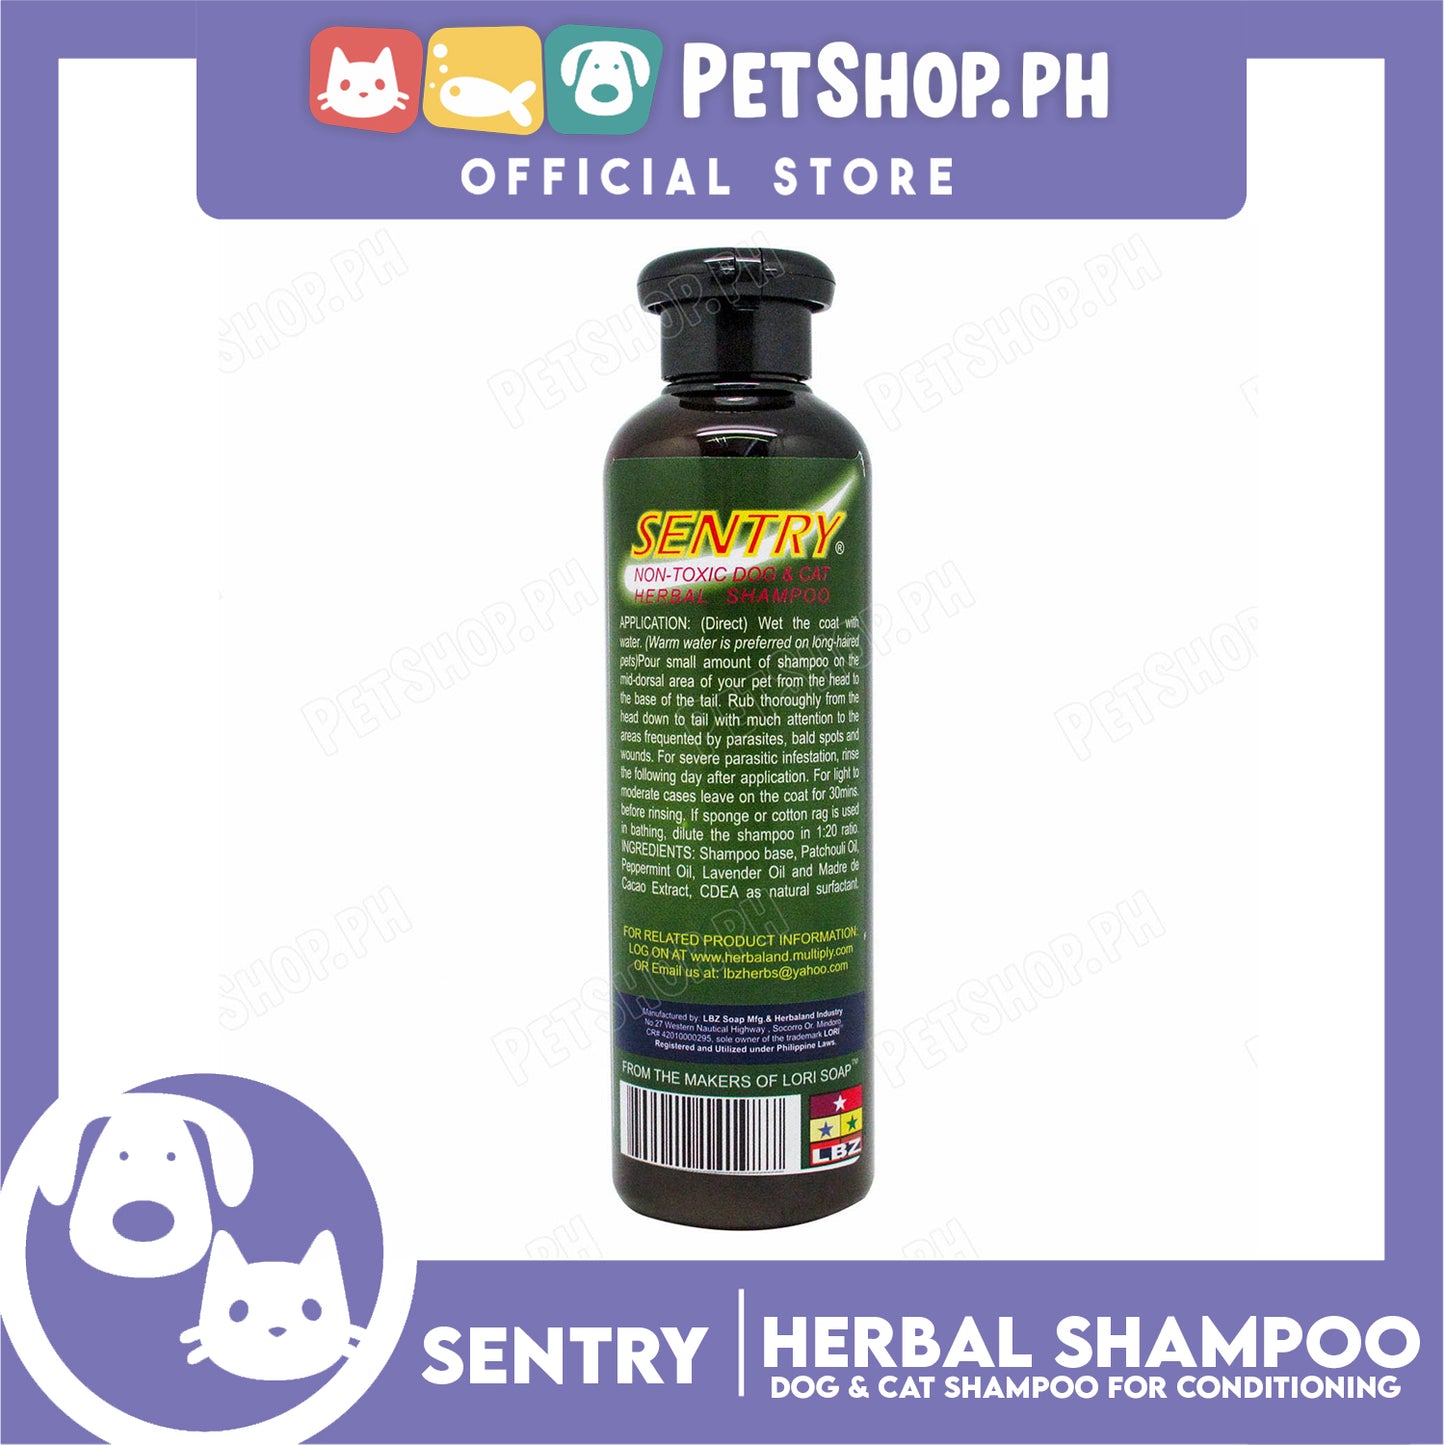 Sentry Non-Toxic Dog And Cat Herbal Shampoo 250ml Anti-Parasitic, Anti-Fungal, Anti-Septic, Deorizing Fur Conditioning For Dog And Cat Grooming